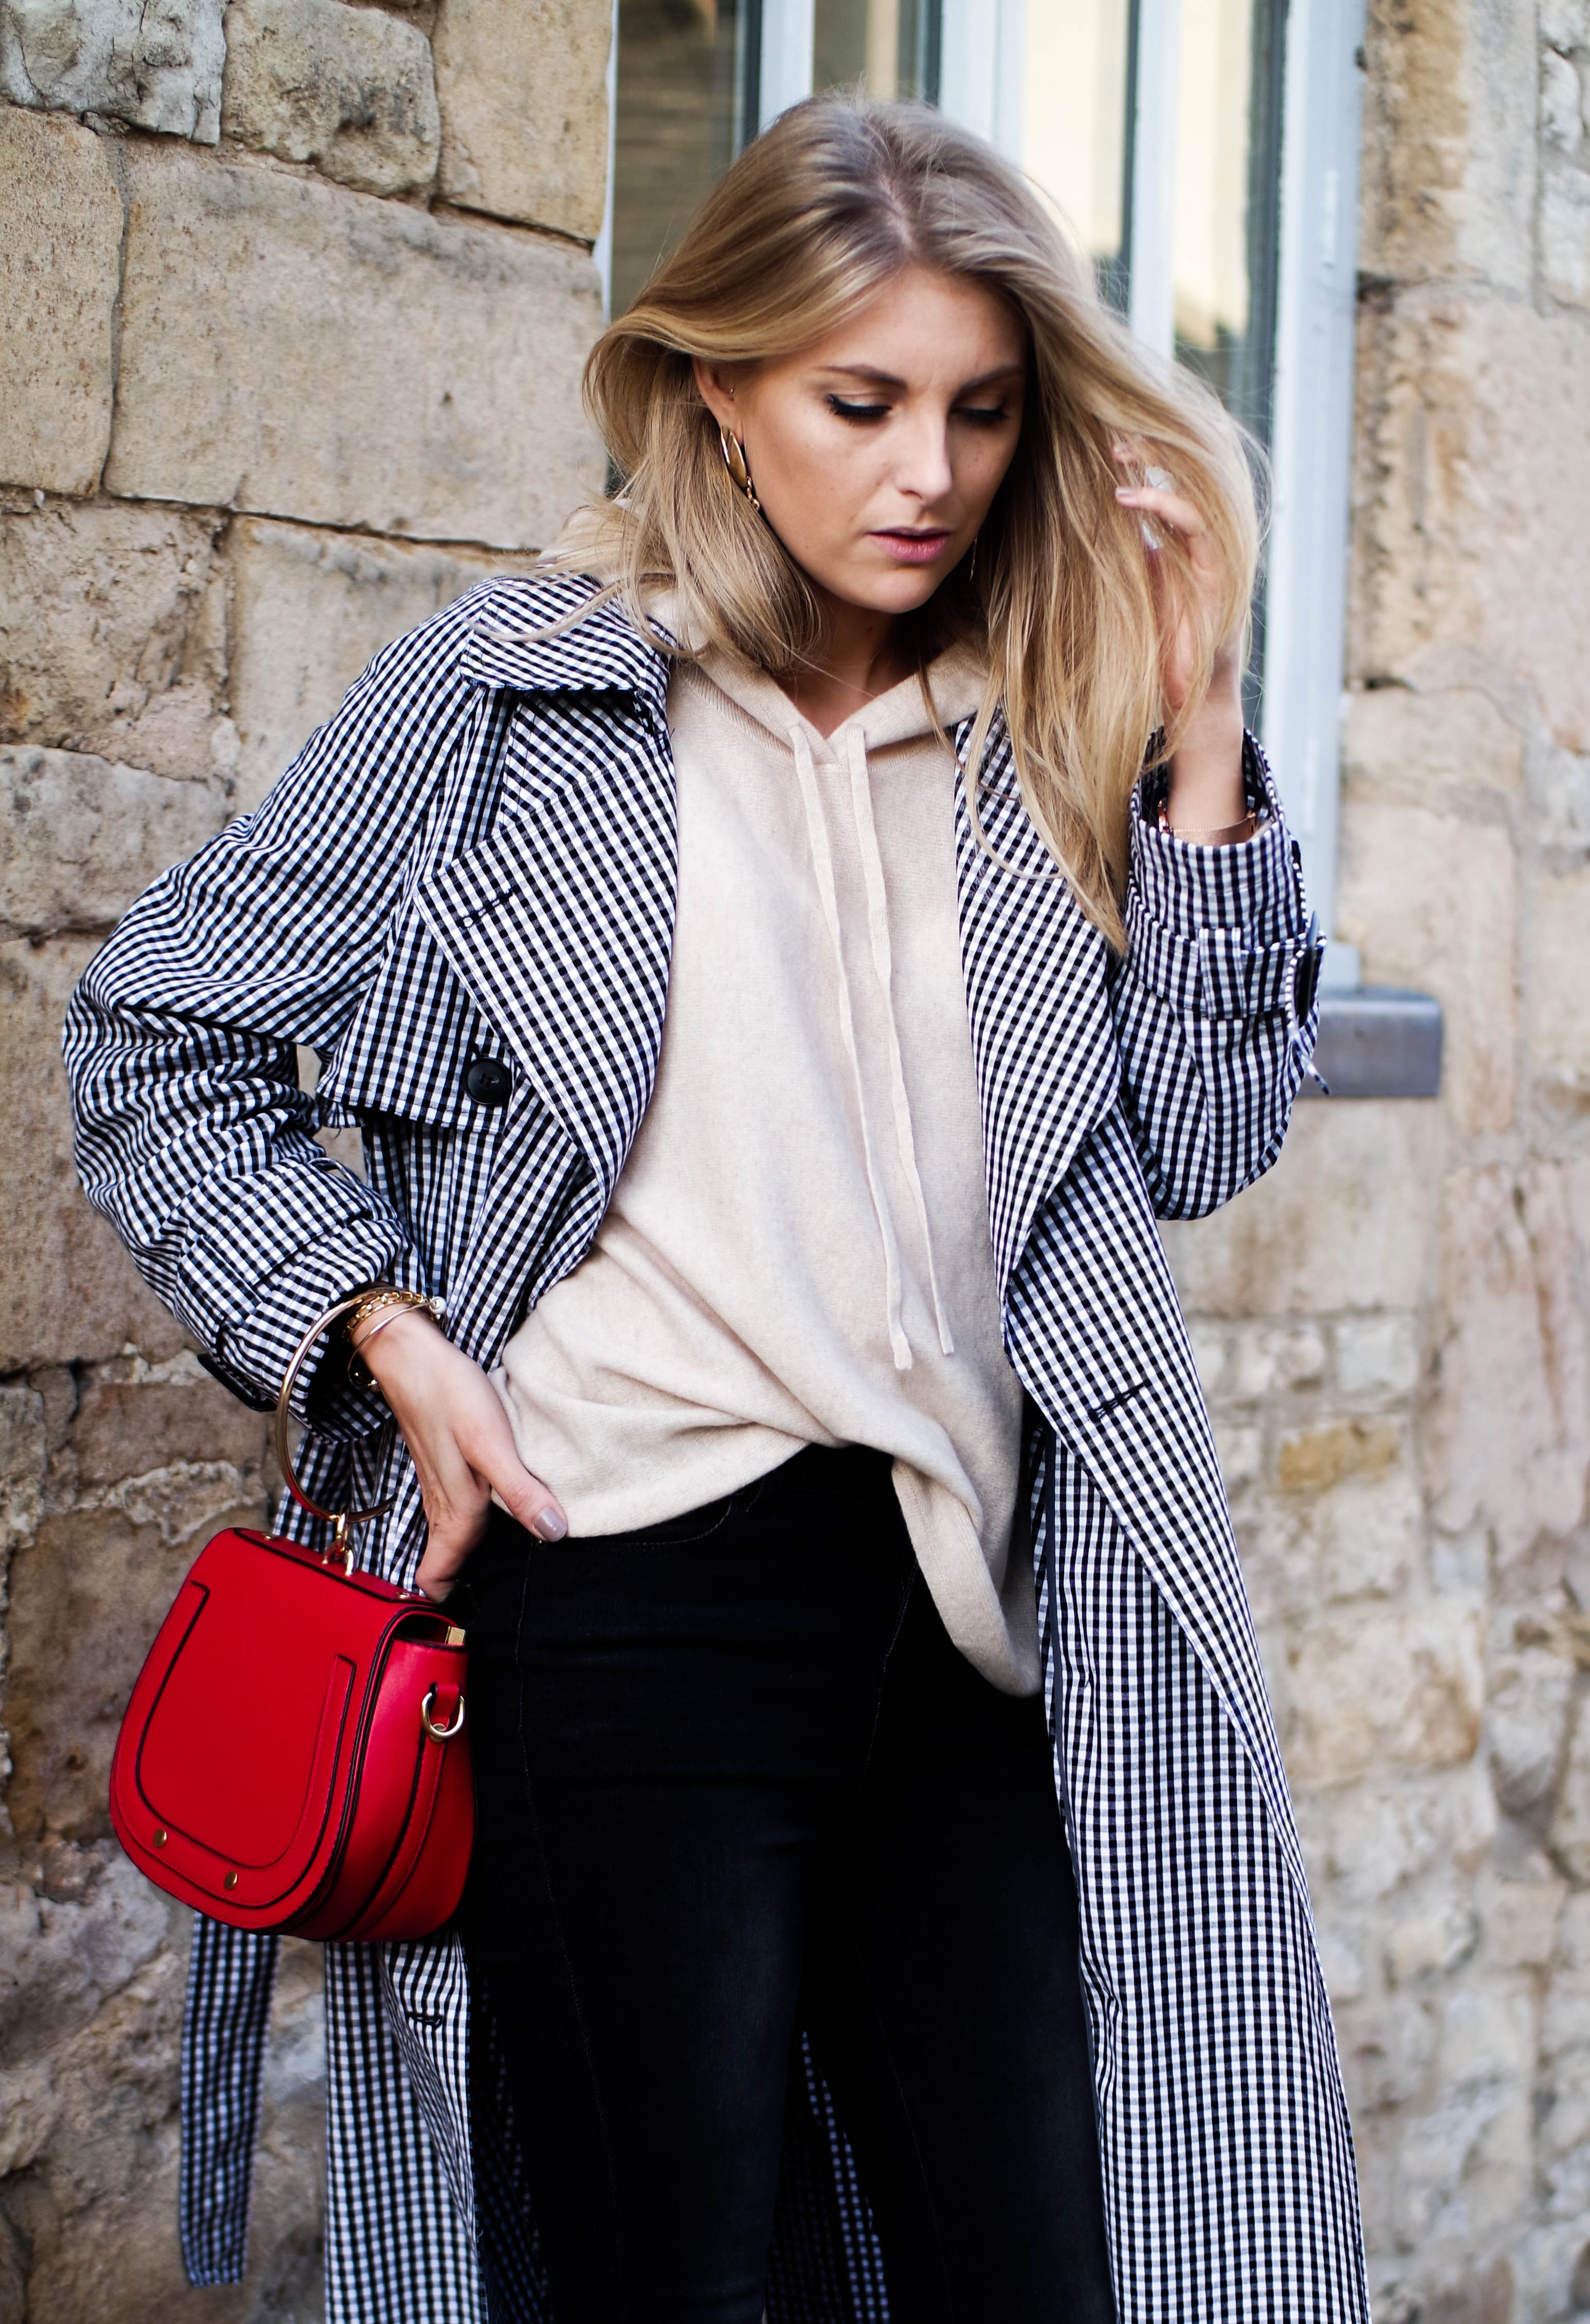 Comfy Fashion Girl - Statement Red Bag | Love Style Mindfulness ...